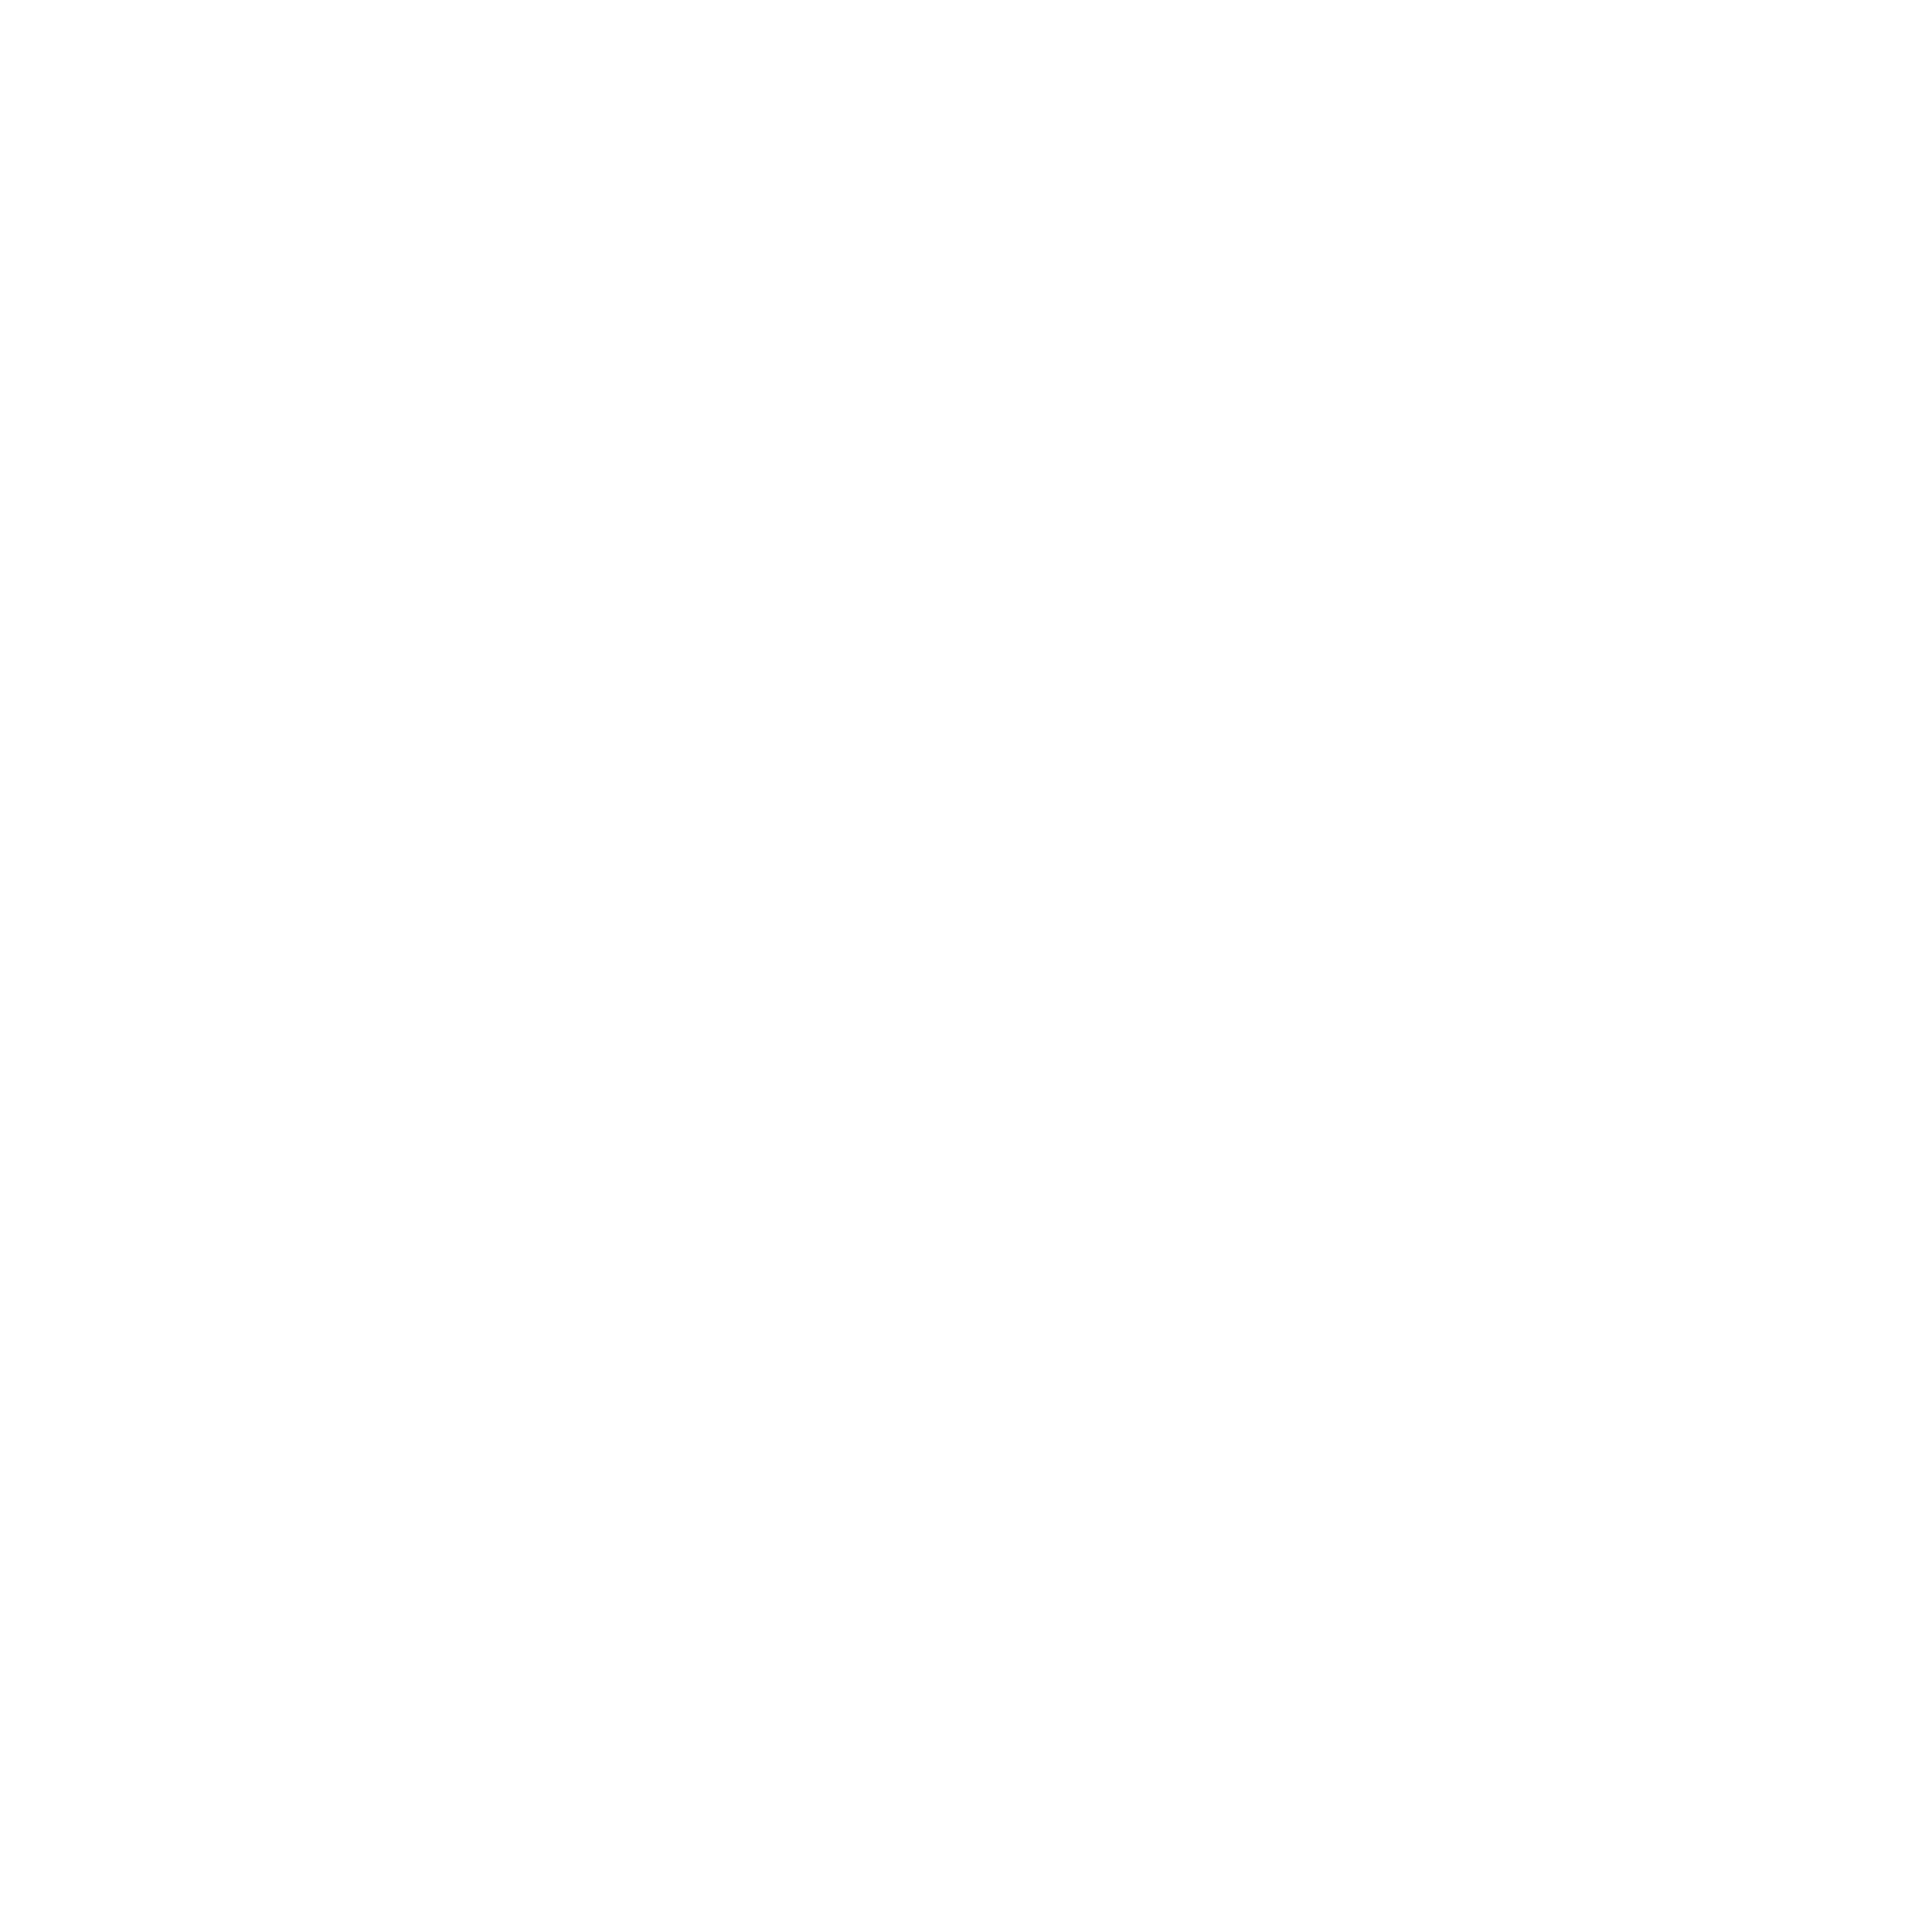 airbnb-2-logo-black-and-white